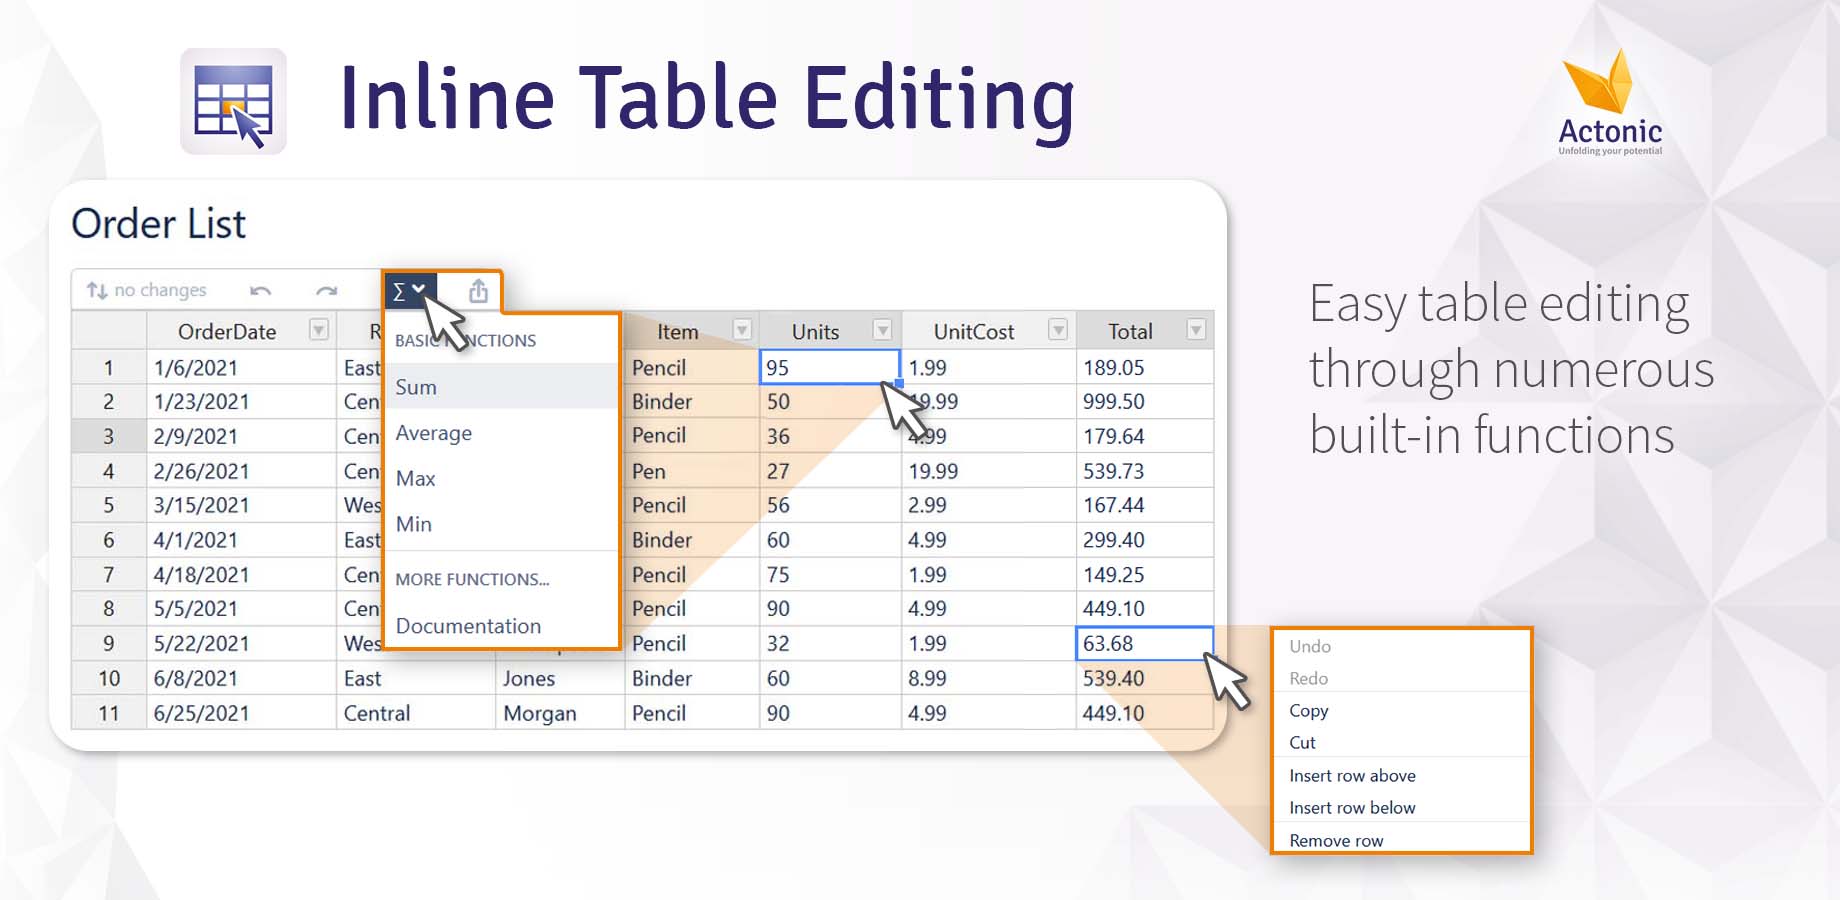 Easy table editing through numerous built-in functions